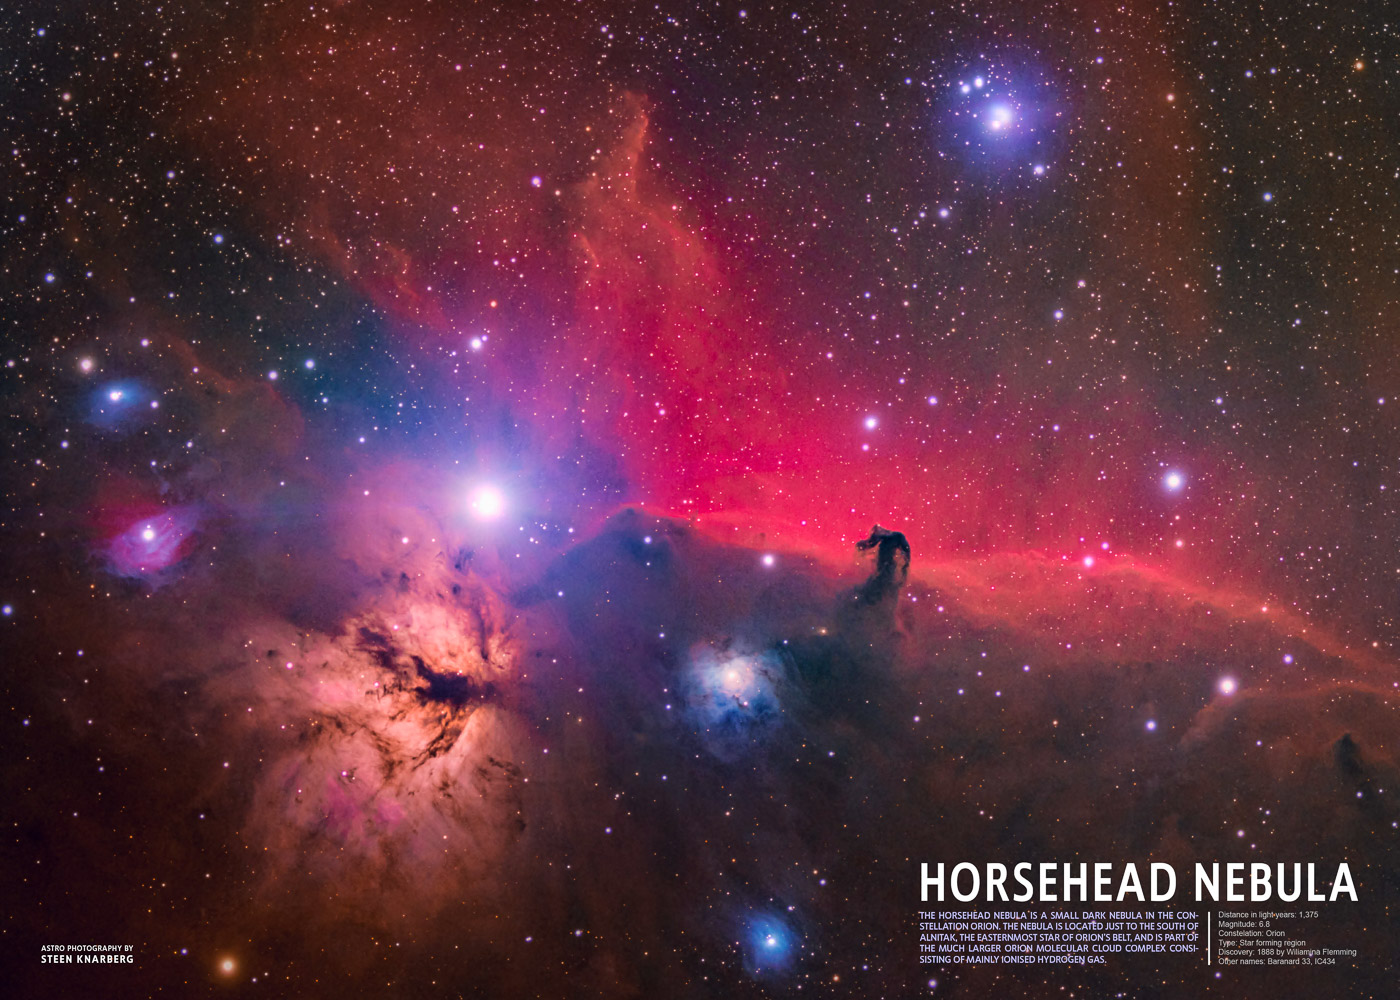 You can buy this  astronomy poster of the Horsehead and Flame Nebula as a giclee printed fine art poster in A1 or A2 format.